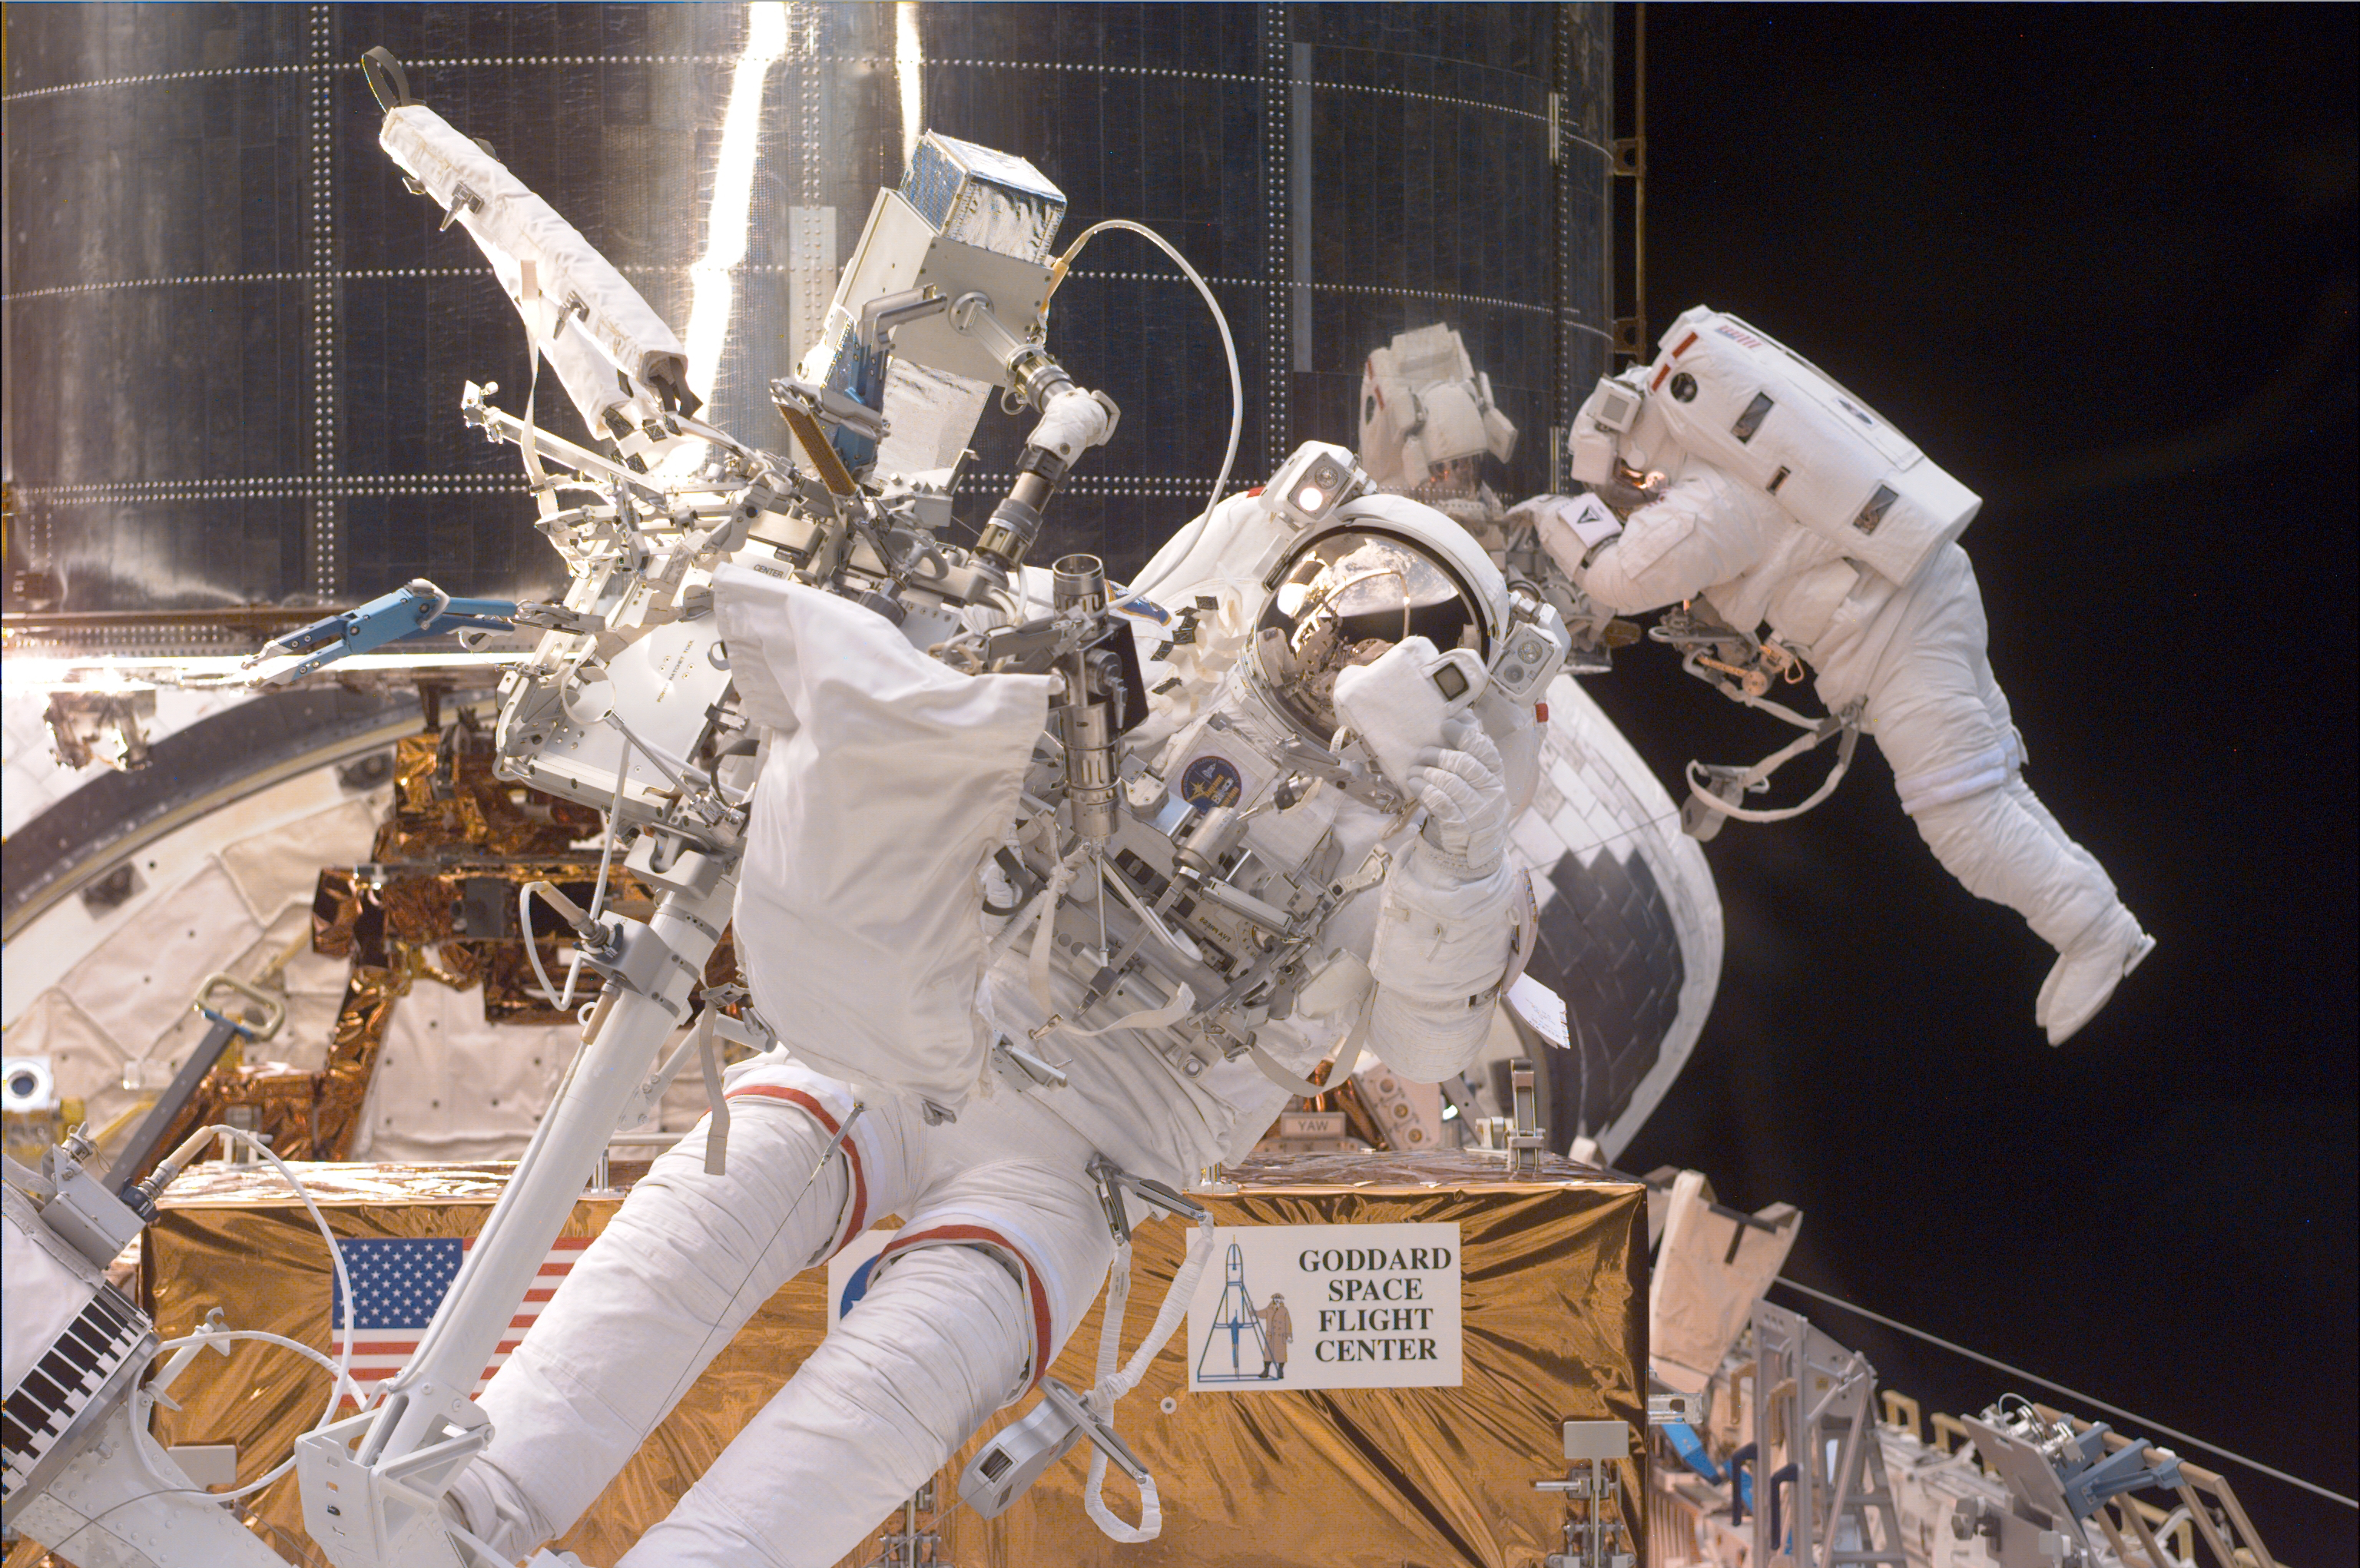 A astronaut anchored to the robotic arm in front of Hubble holds up a camera device to take a picture. Another astronaut is visible working on Hubble behind him.